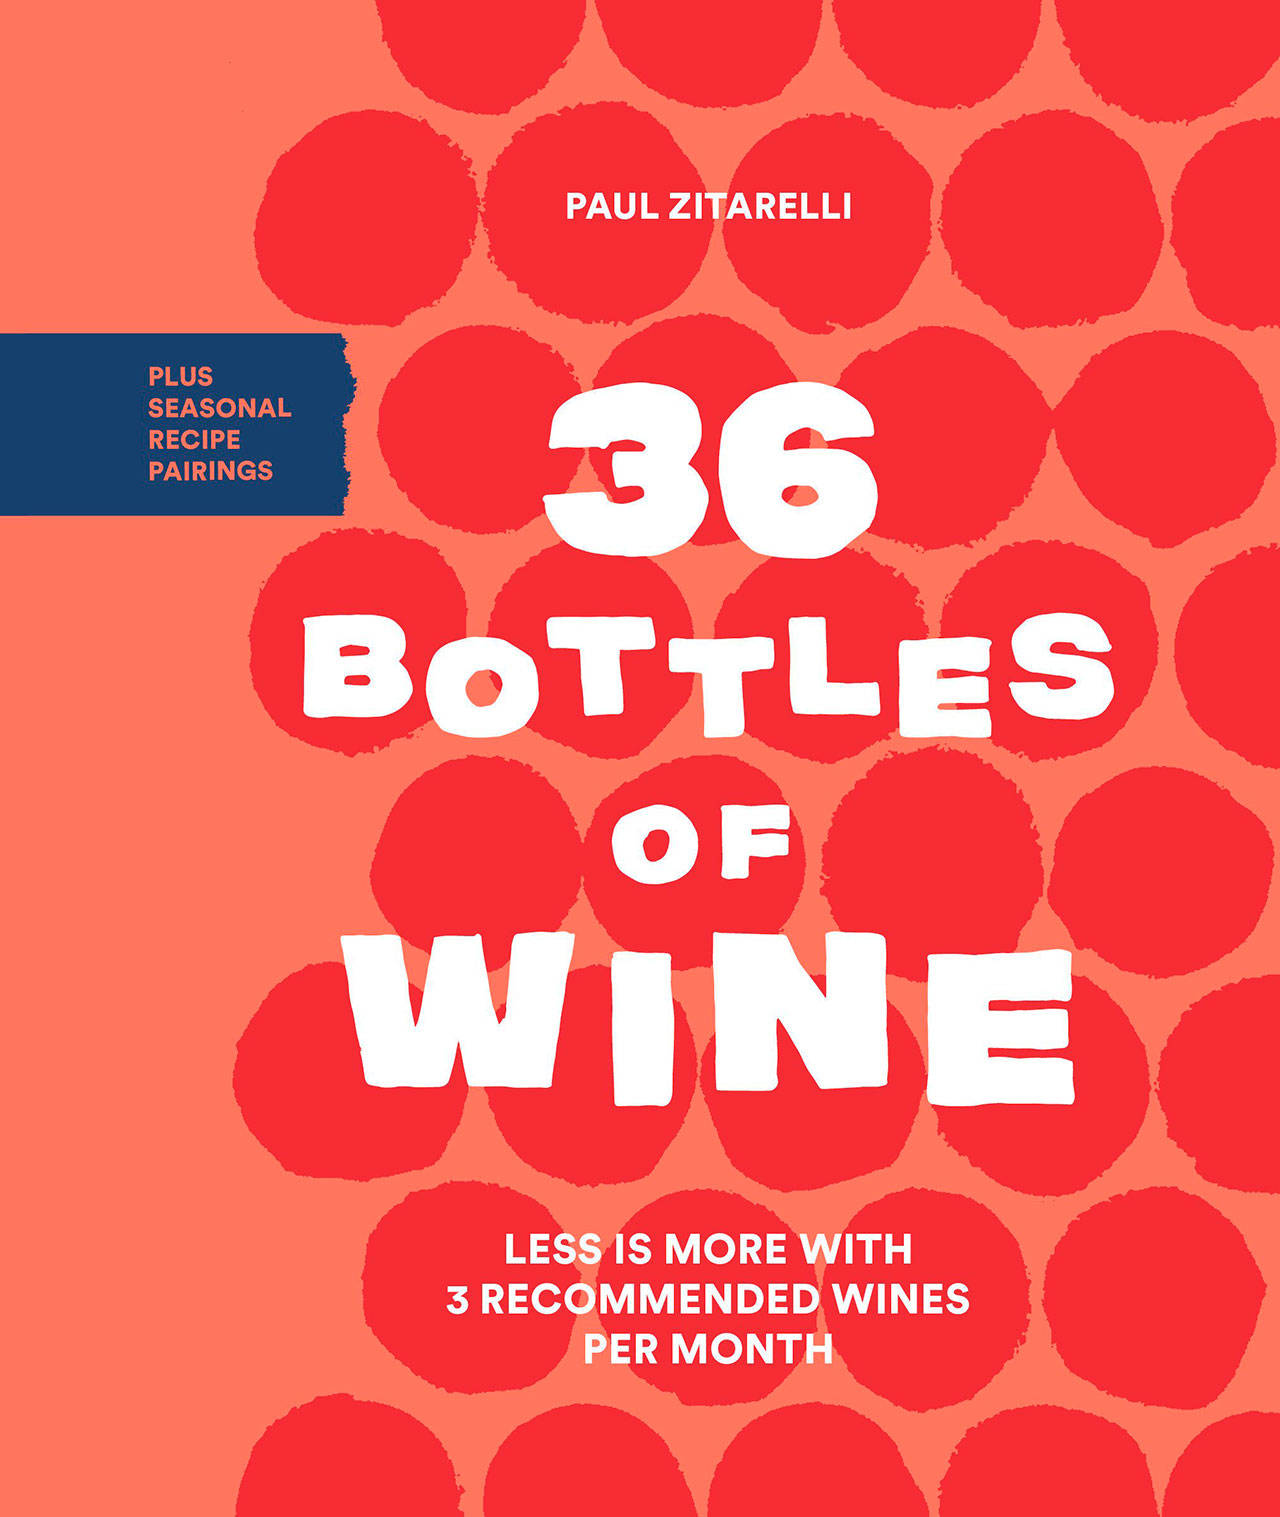 Image courtesy of Eagle Harbor Book Company | Paul Zitarelli will stop by Eagle Harbor Book Company at 7 p.m. Thursday, Aug. 15 to discuss his book “36 Bottles of Wine.”